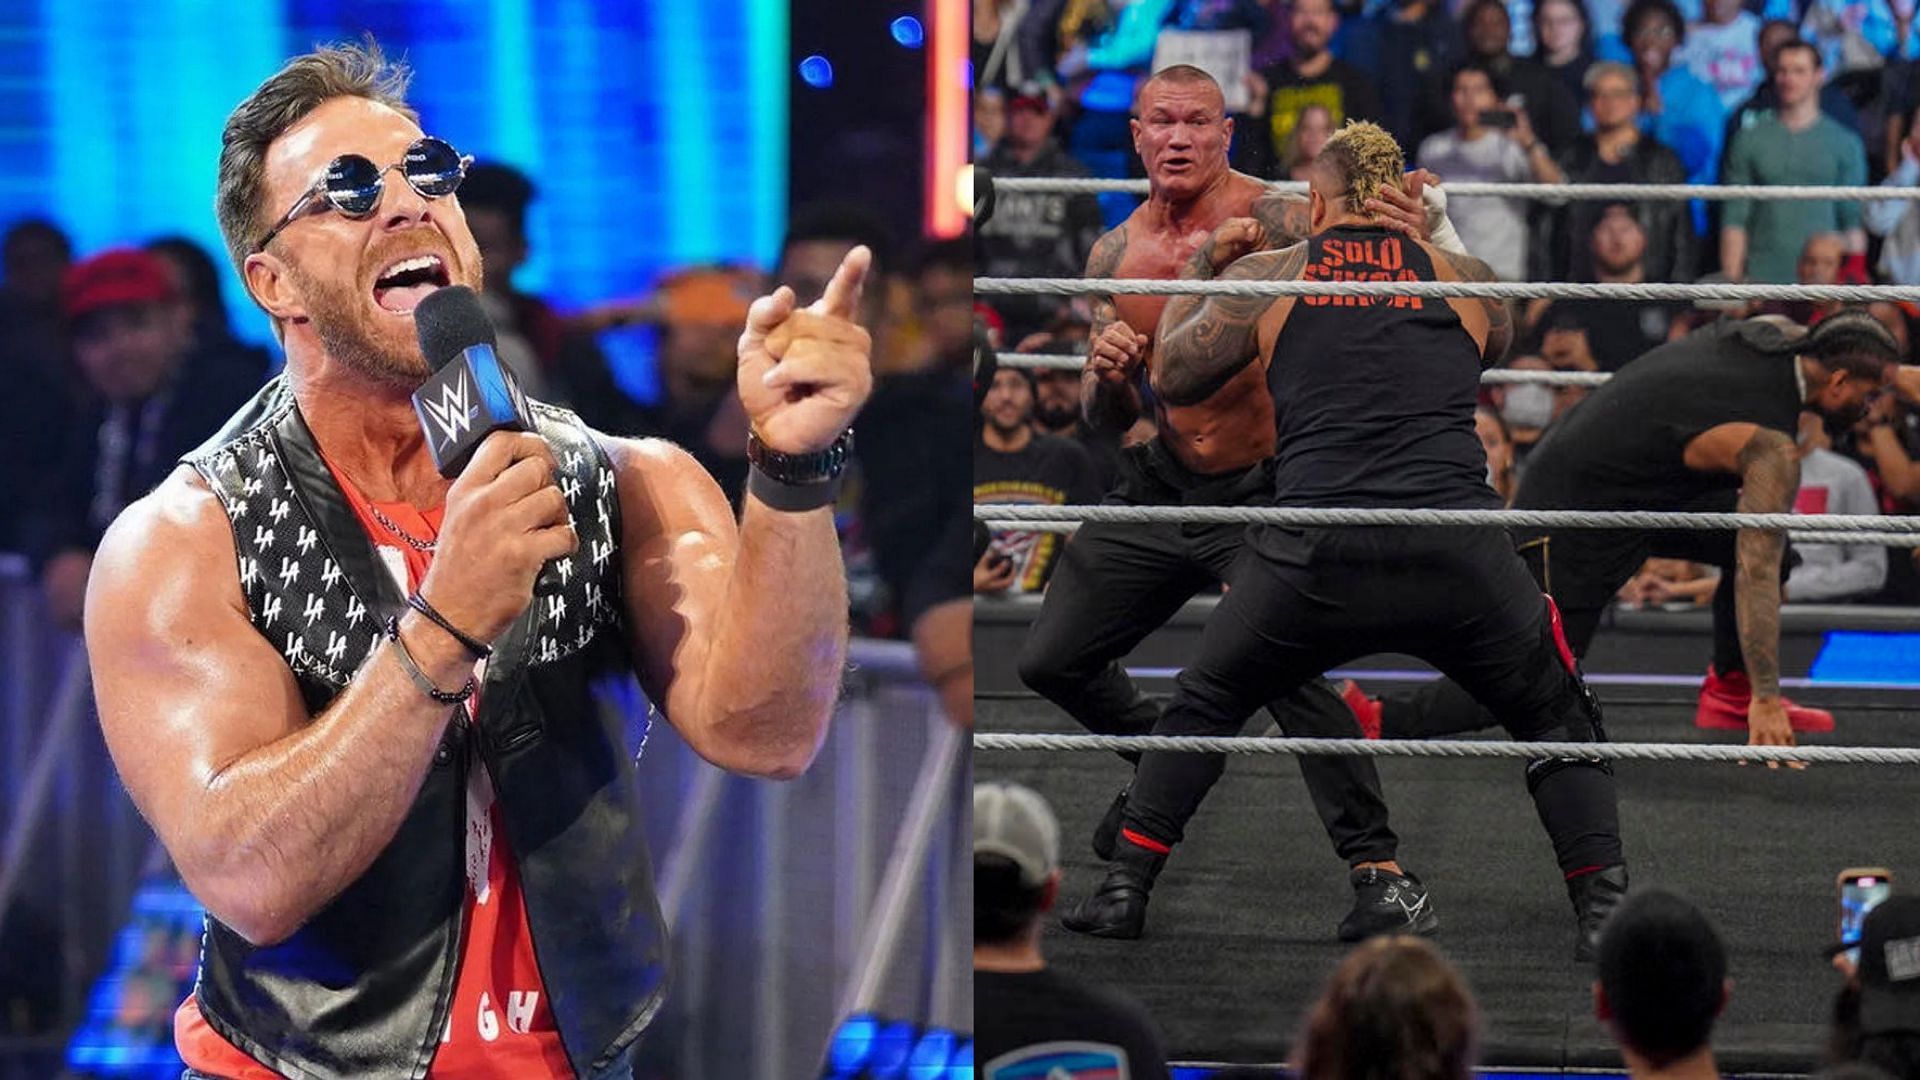 Randy Orton and LA Knight will be teaming up on SmackDown